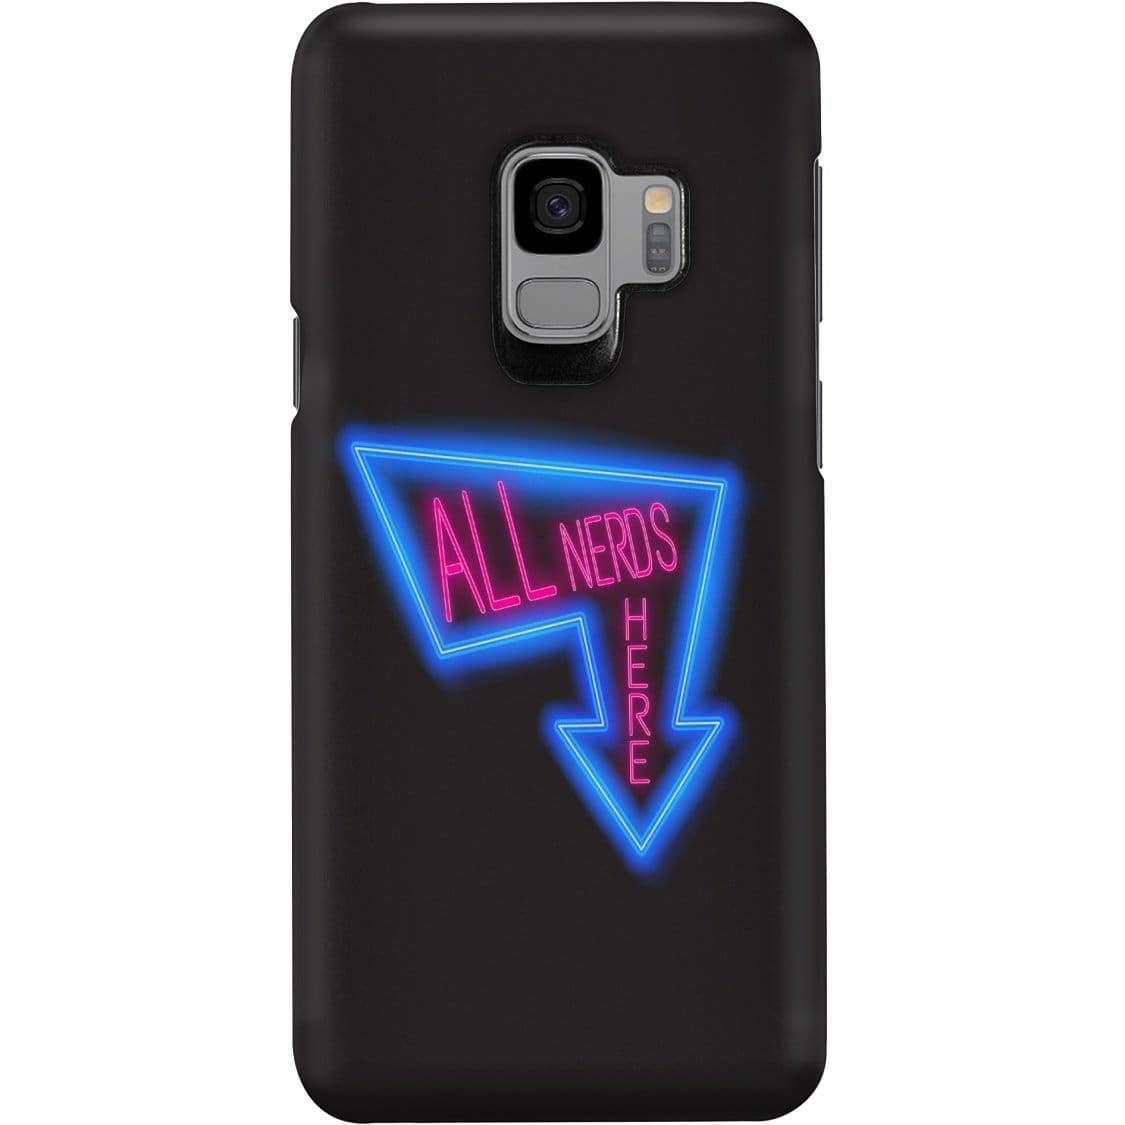 All Nerds Here Neon Logo Phone Case - Snap * iPhone * Samsung * - Samsung Galaxy S9 Case / Gloss / All Nerds Here